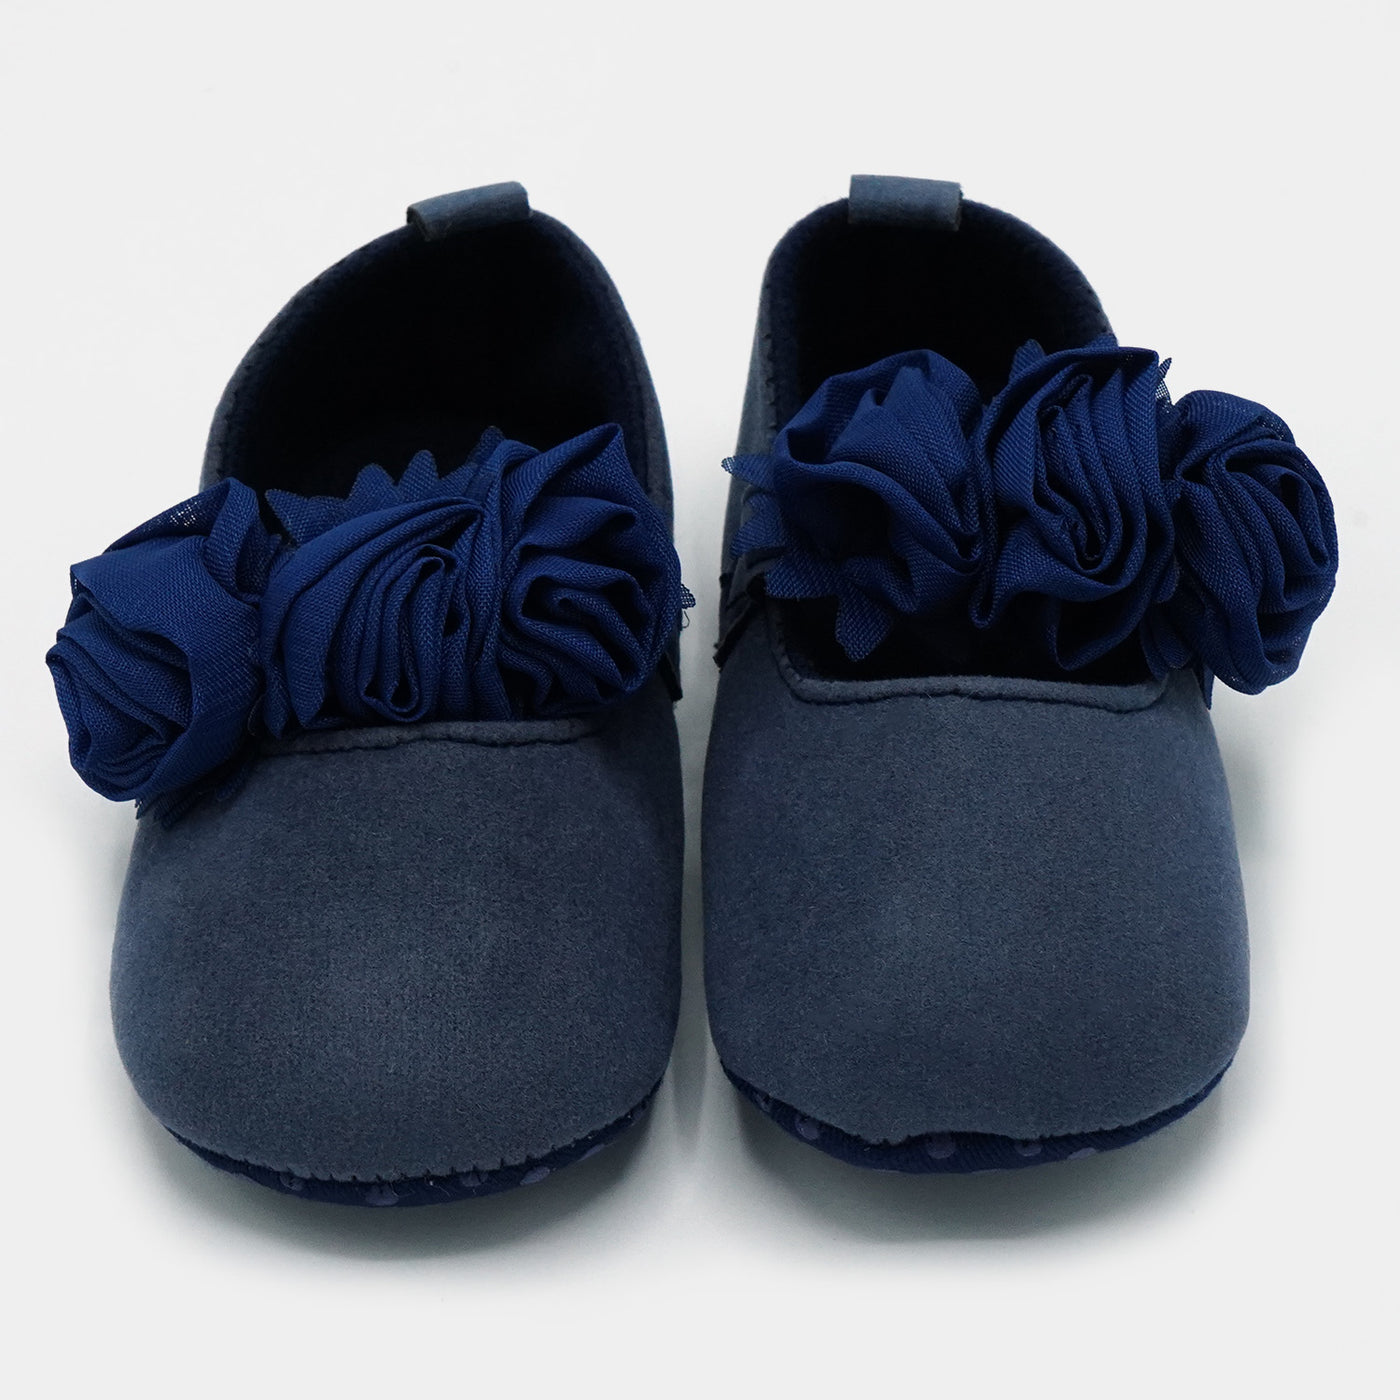 Baby Girls Shoes C-373-Blue